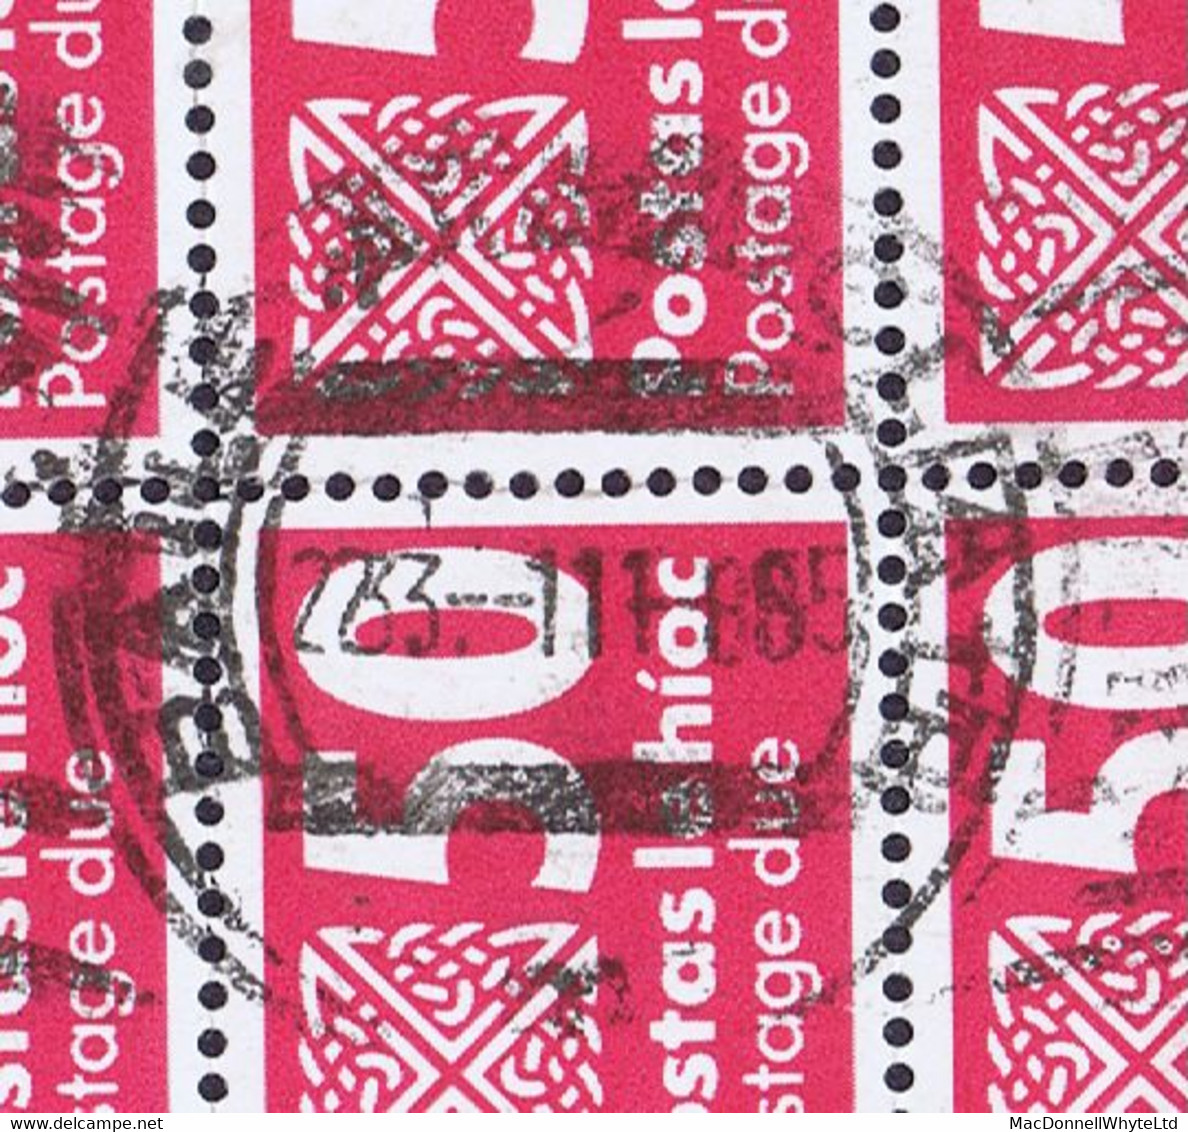 Ireland Postage Due 1985 50p Cerise Used Block Of 20 Cancelled Dublin Roller BAILE ATHA CLIATH 23 11 85, Two Damaged - Portomarken